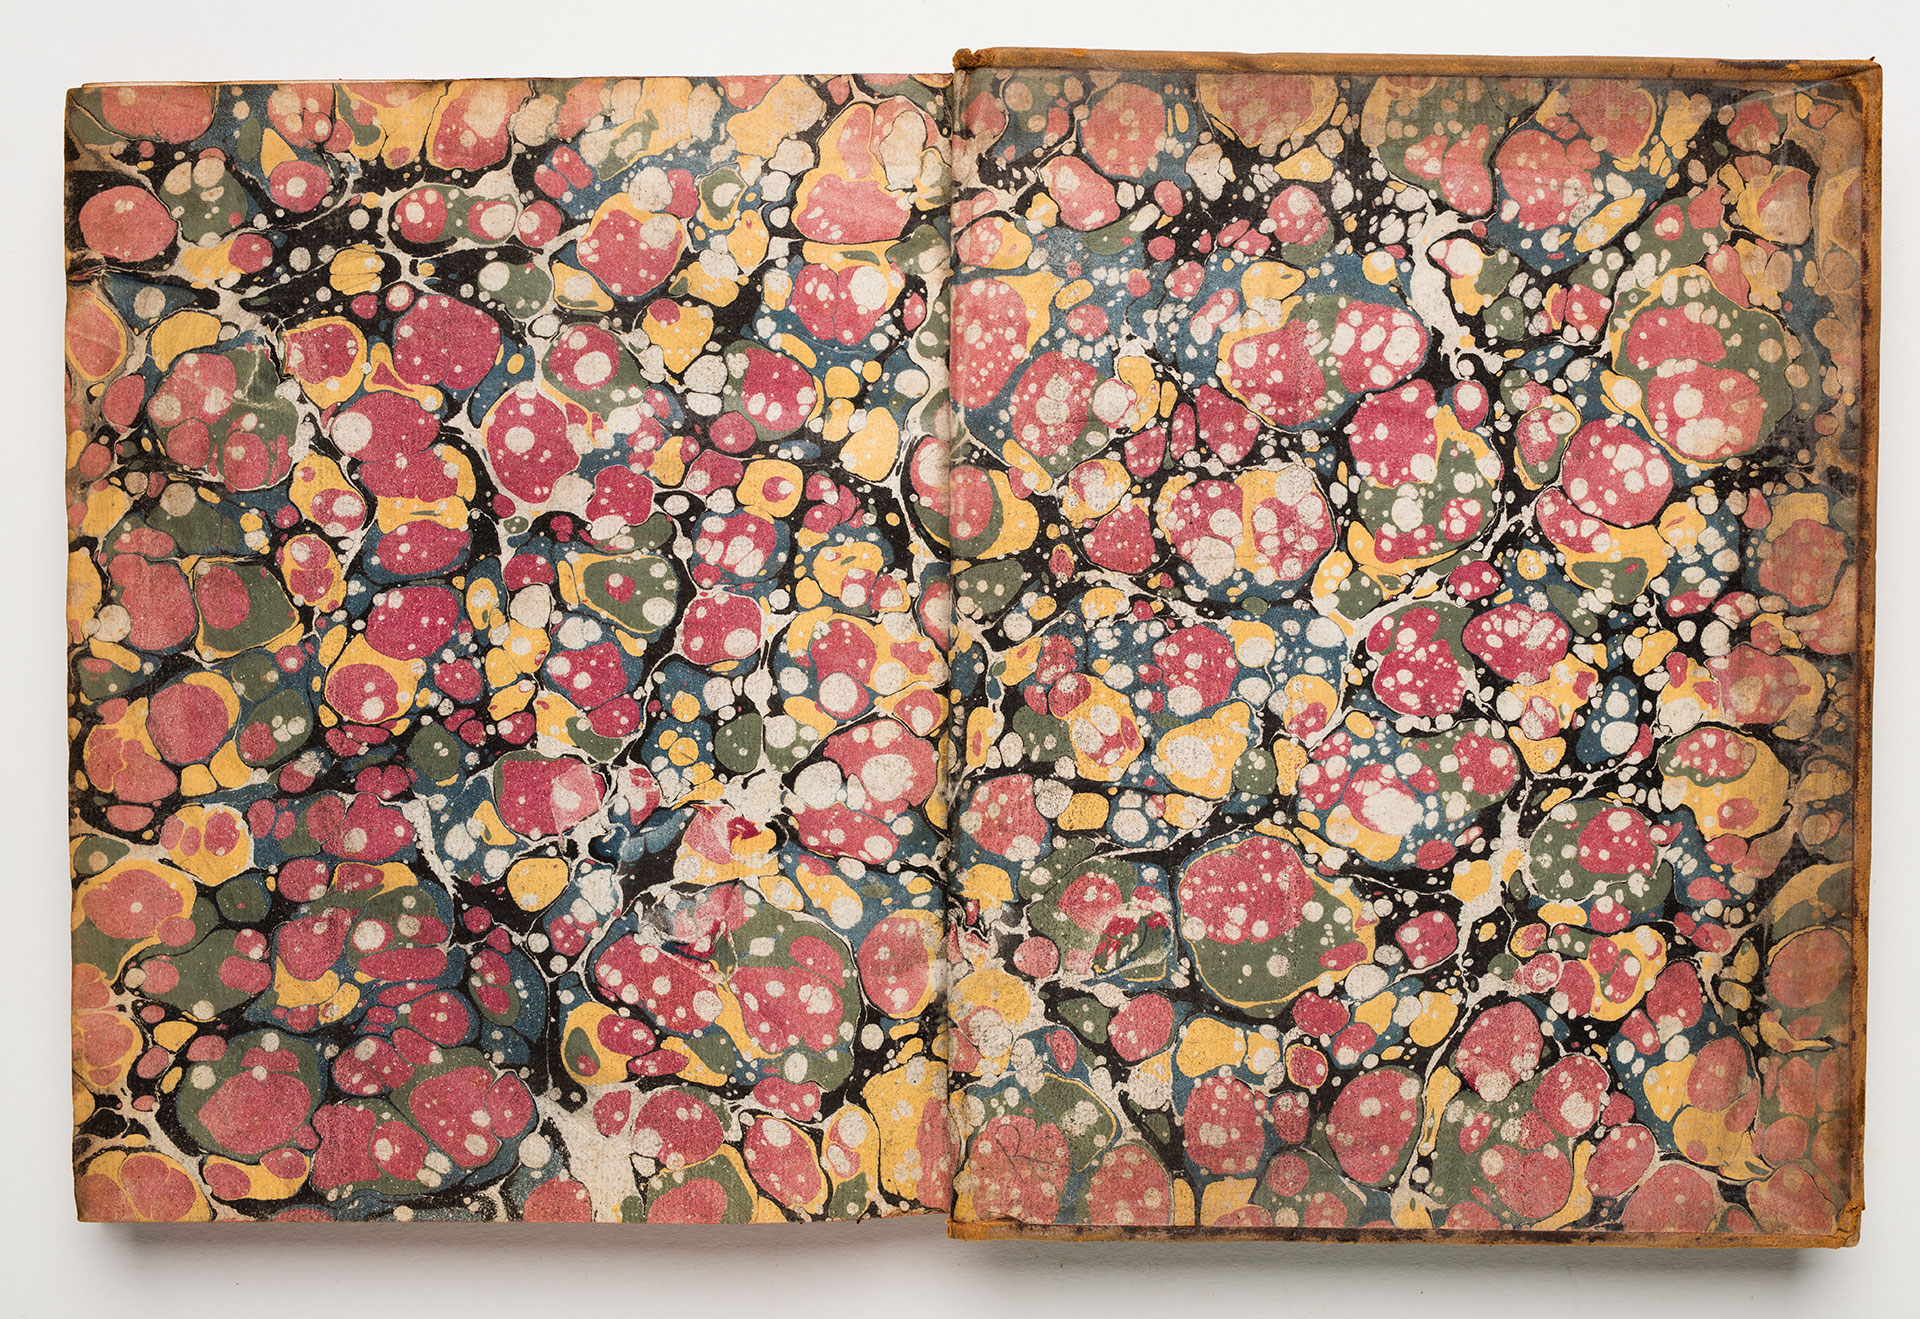 Endpapers with a colourful marbled pattern.